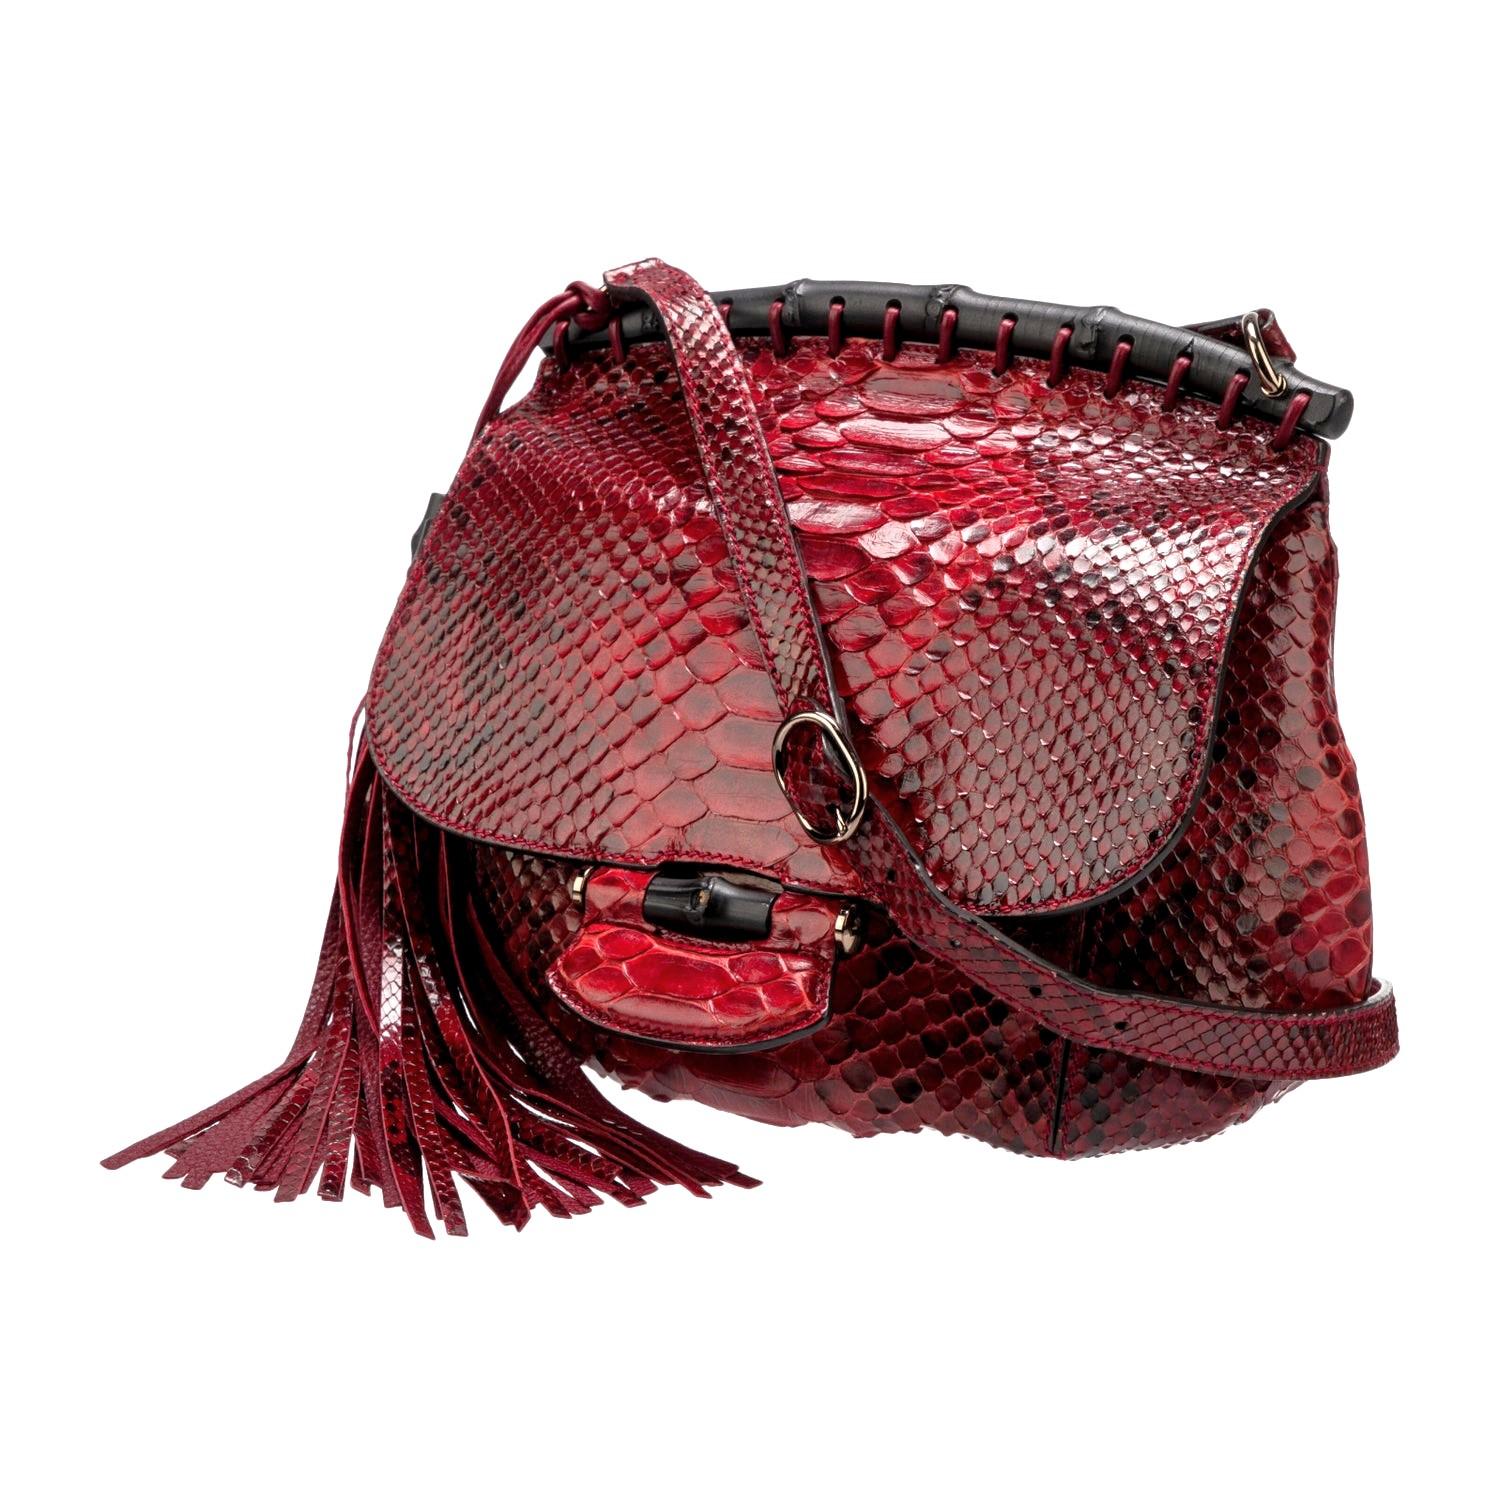 New Gucci Nouveau Python Fringe Bamboo Runway Bag in Red $3100 For Sale 15